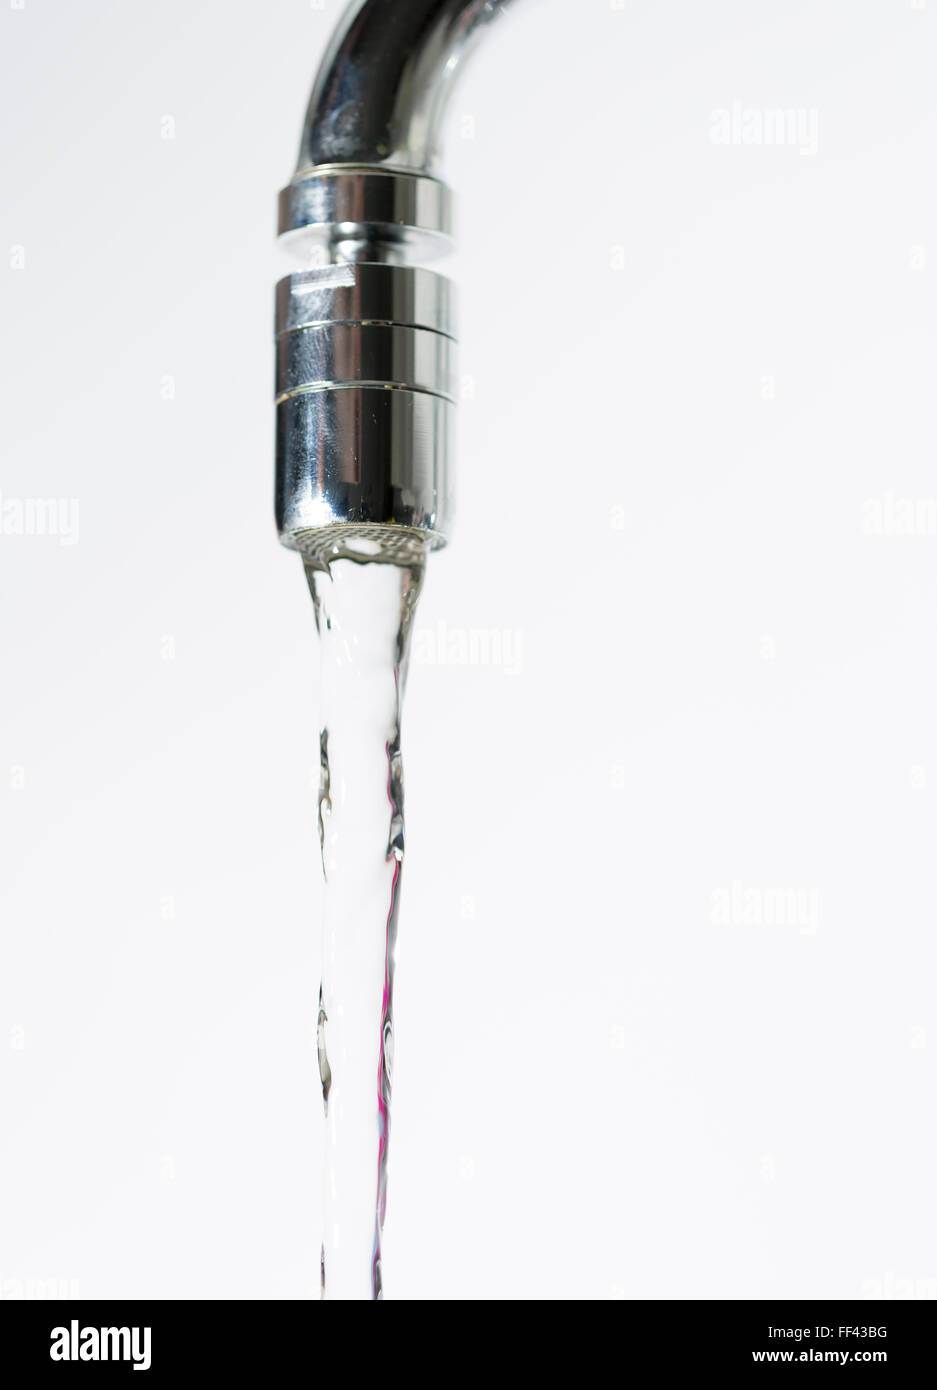 Water Pouring from Water Faucet close up. Stock Photo